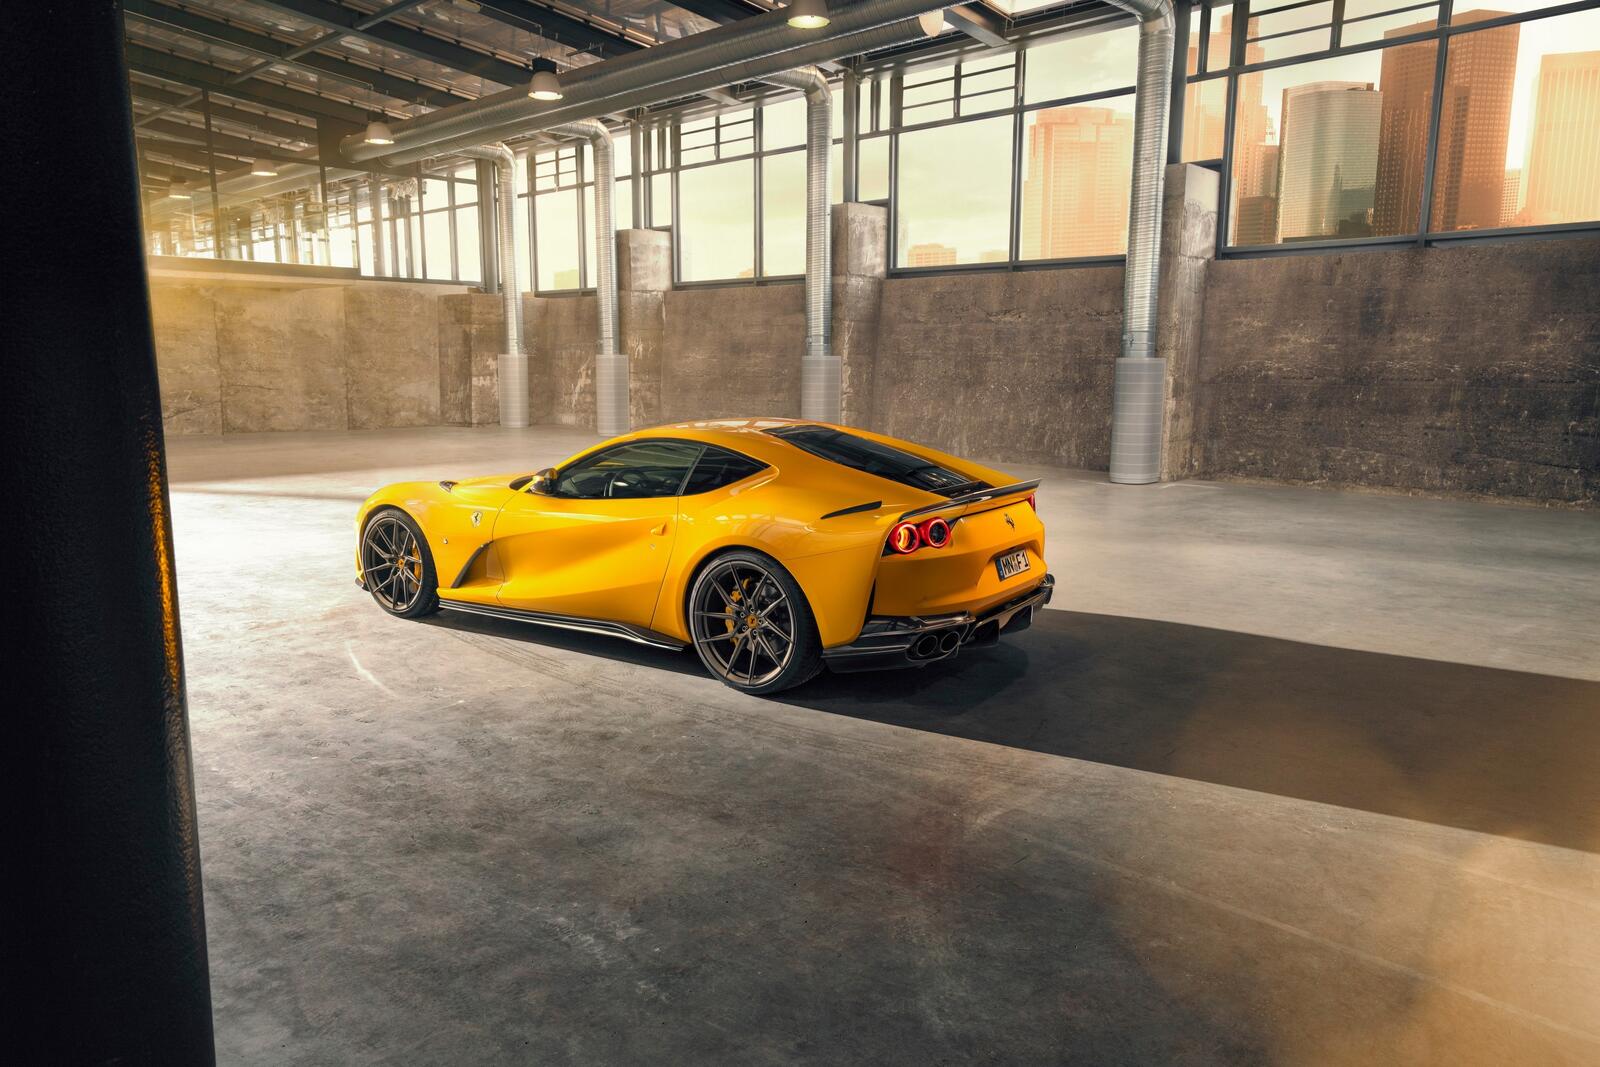 Free photo Yellow ferrari 812 superfast standing in a hangar with large windows